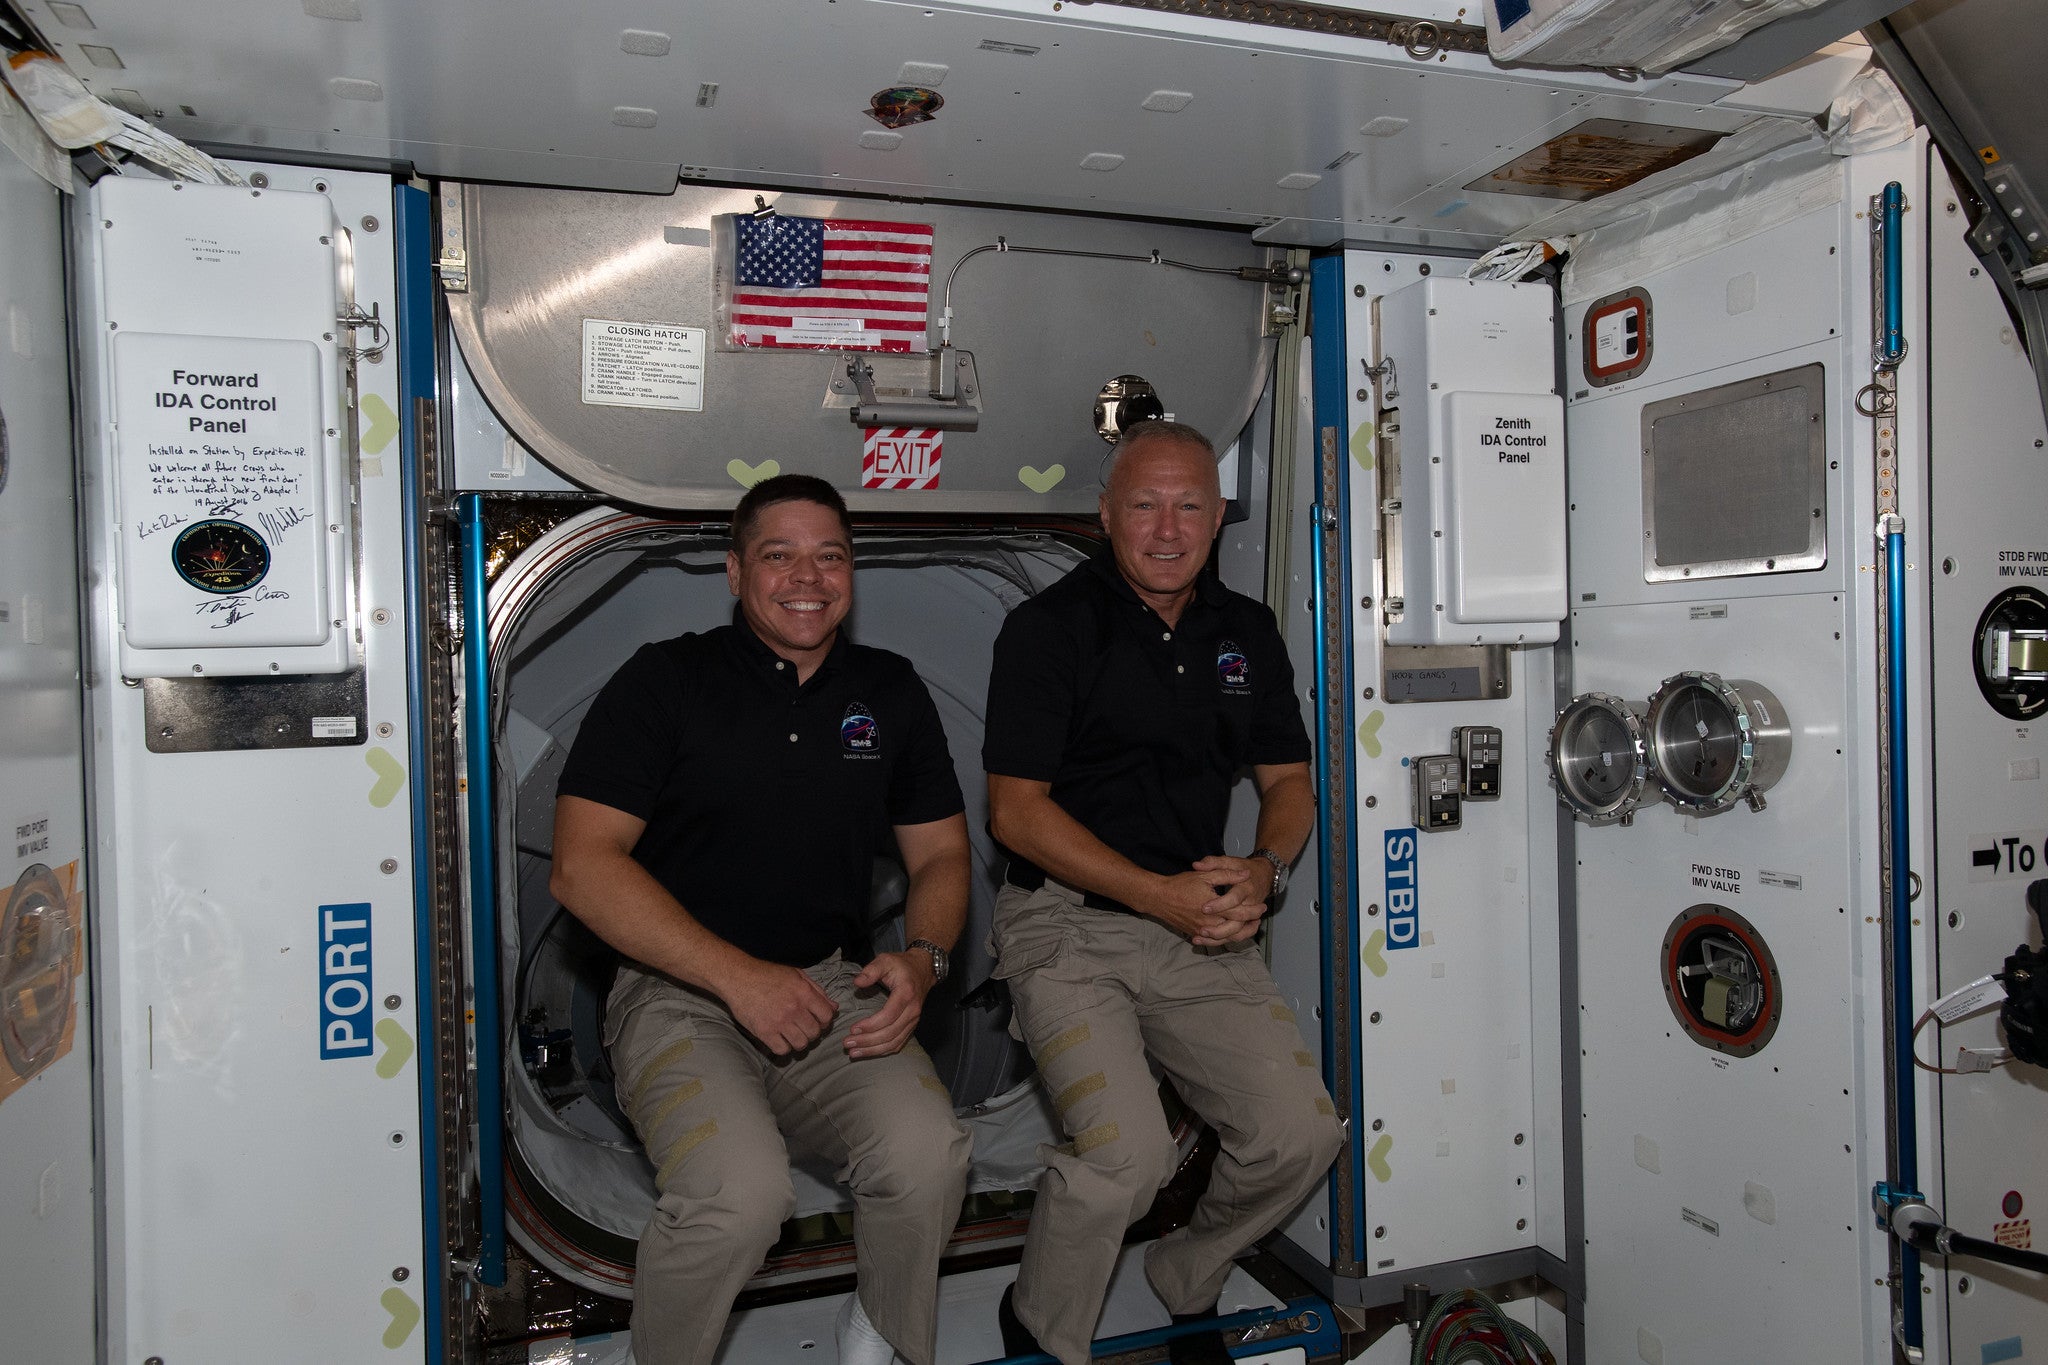 NASA announces Astronauts will return aboard SpaceX Crew Dragon early August